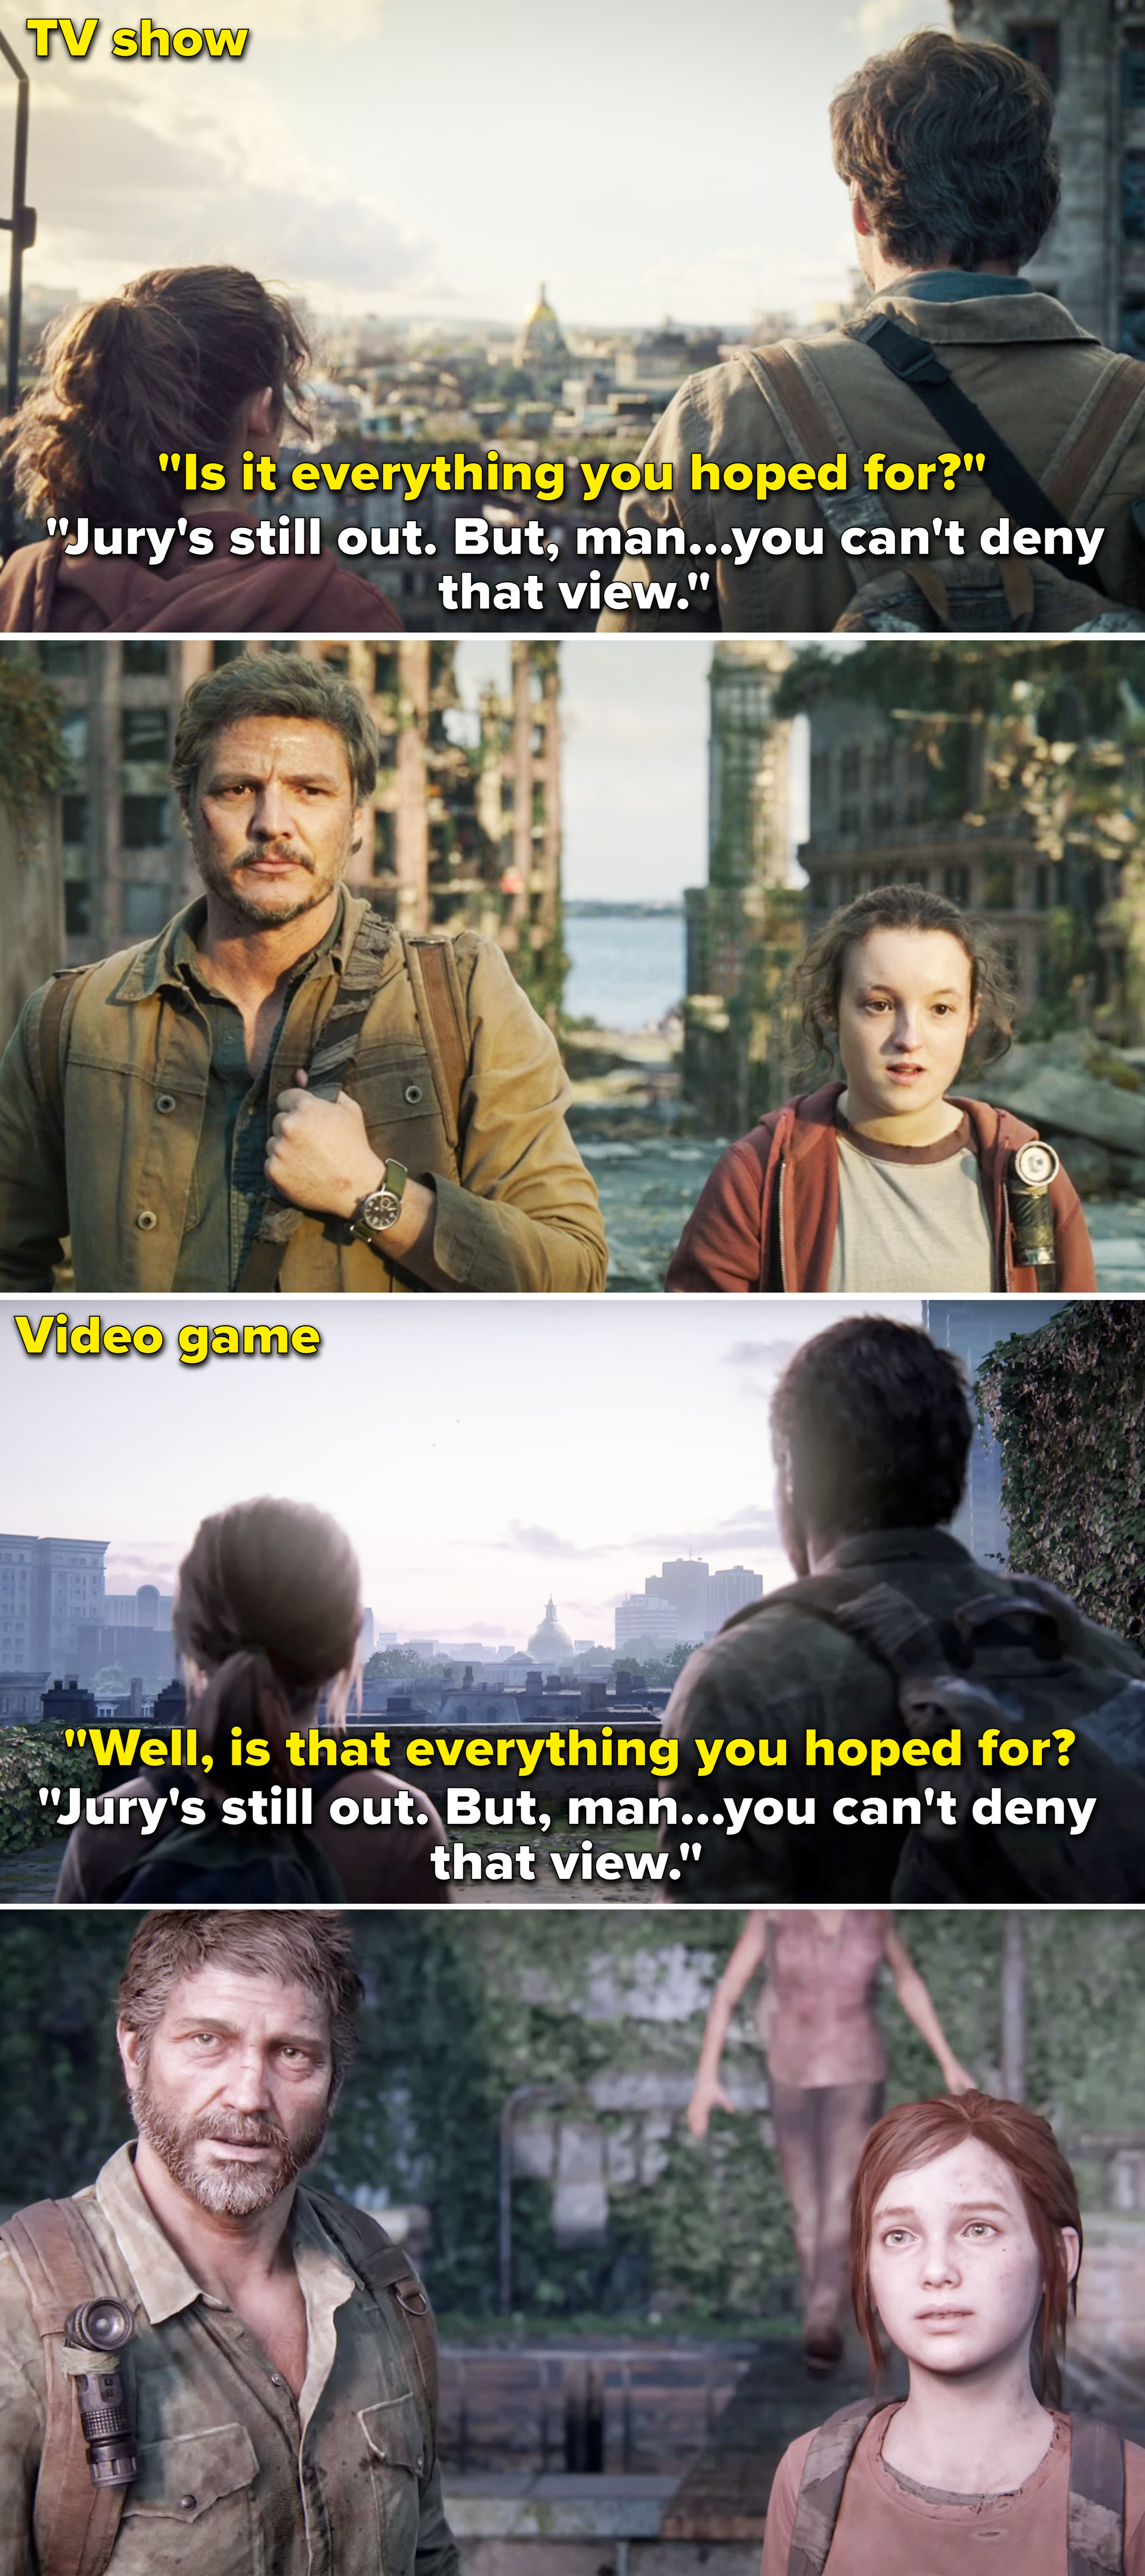 Ellie telling Joel, &quot;You can&#x27;t deny that view&quot; in the show vs game